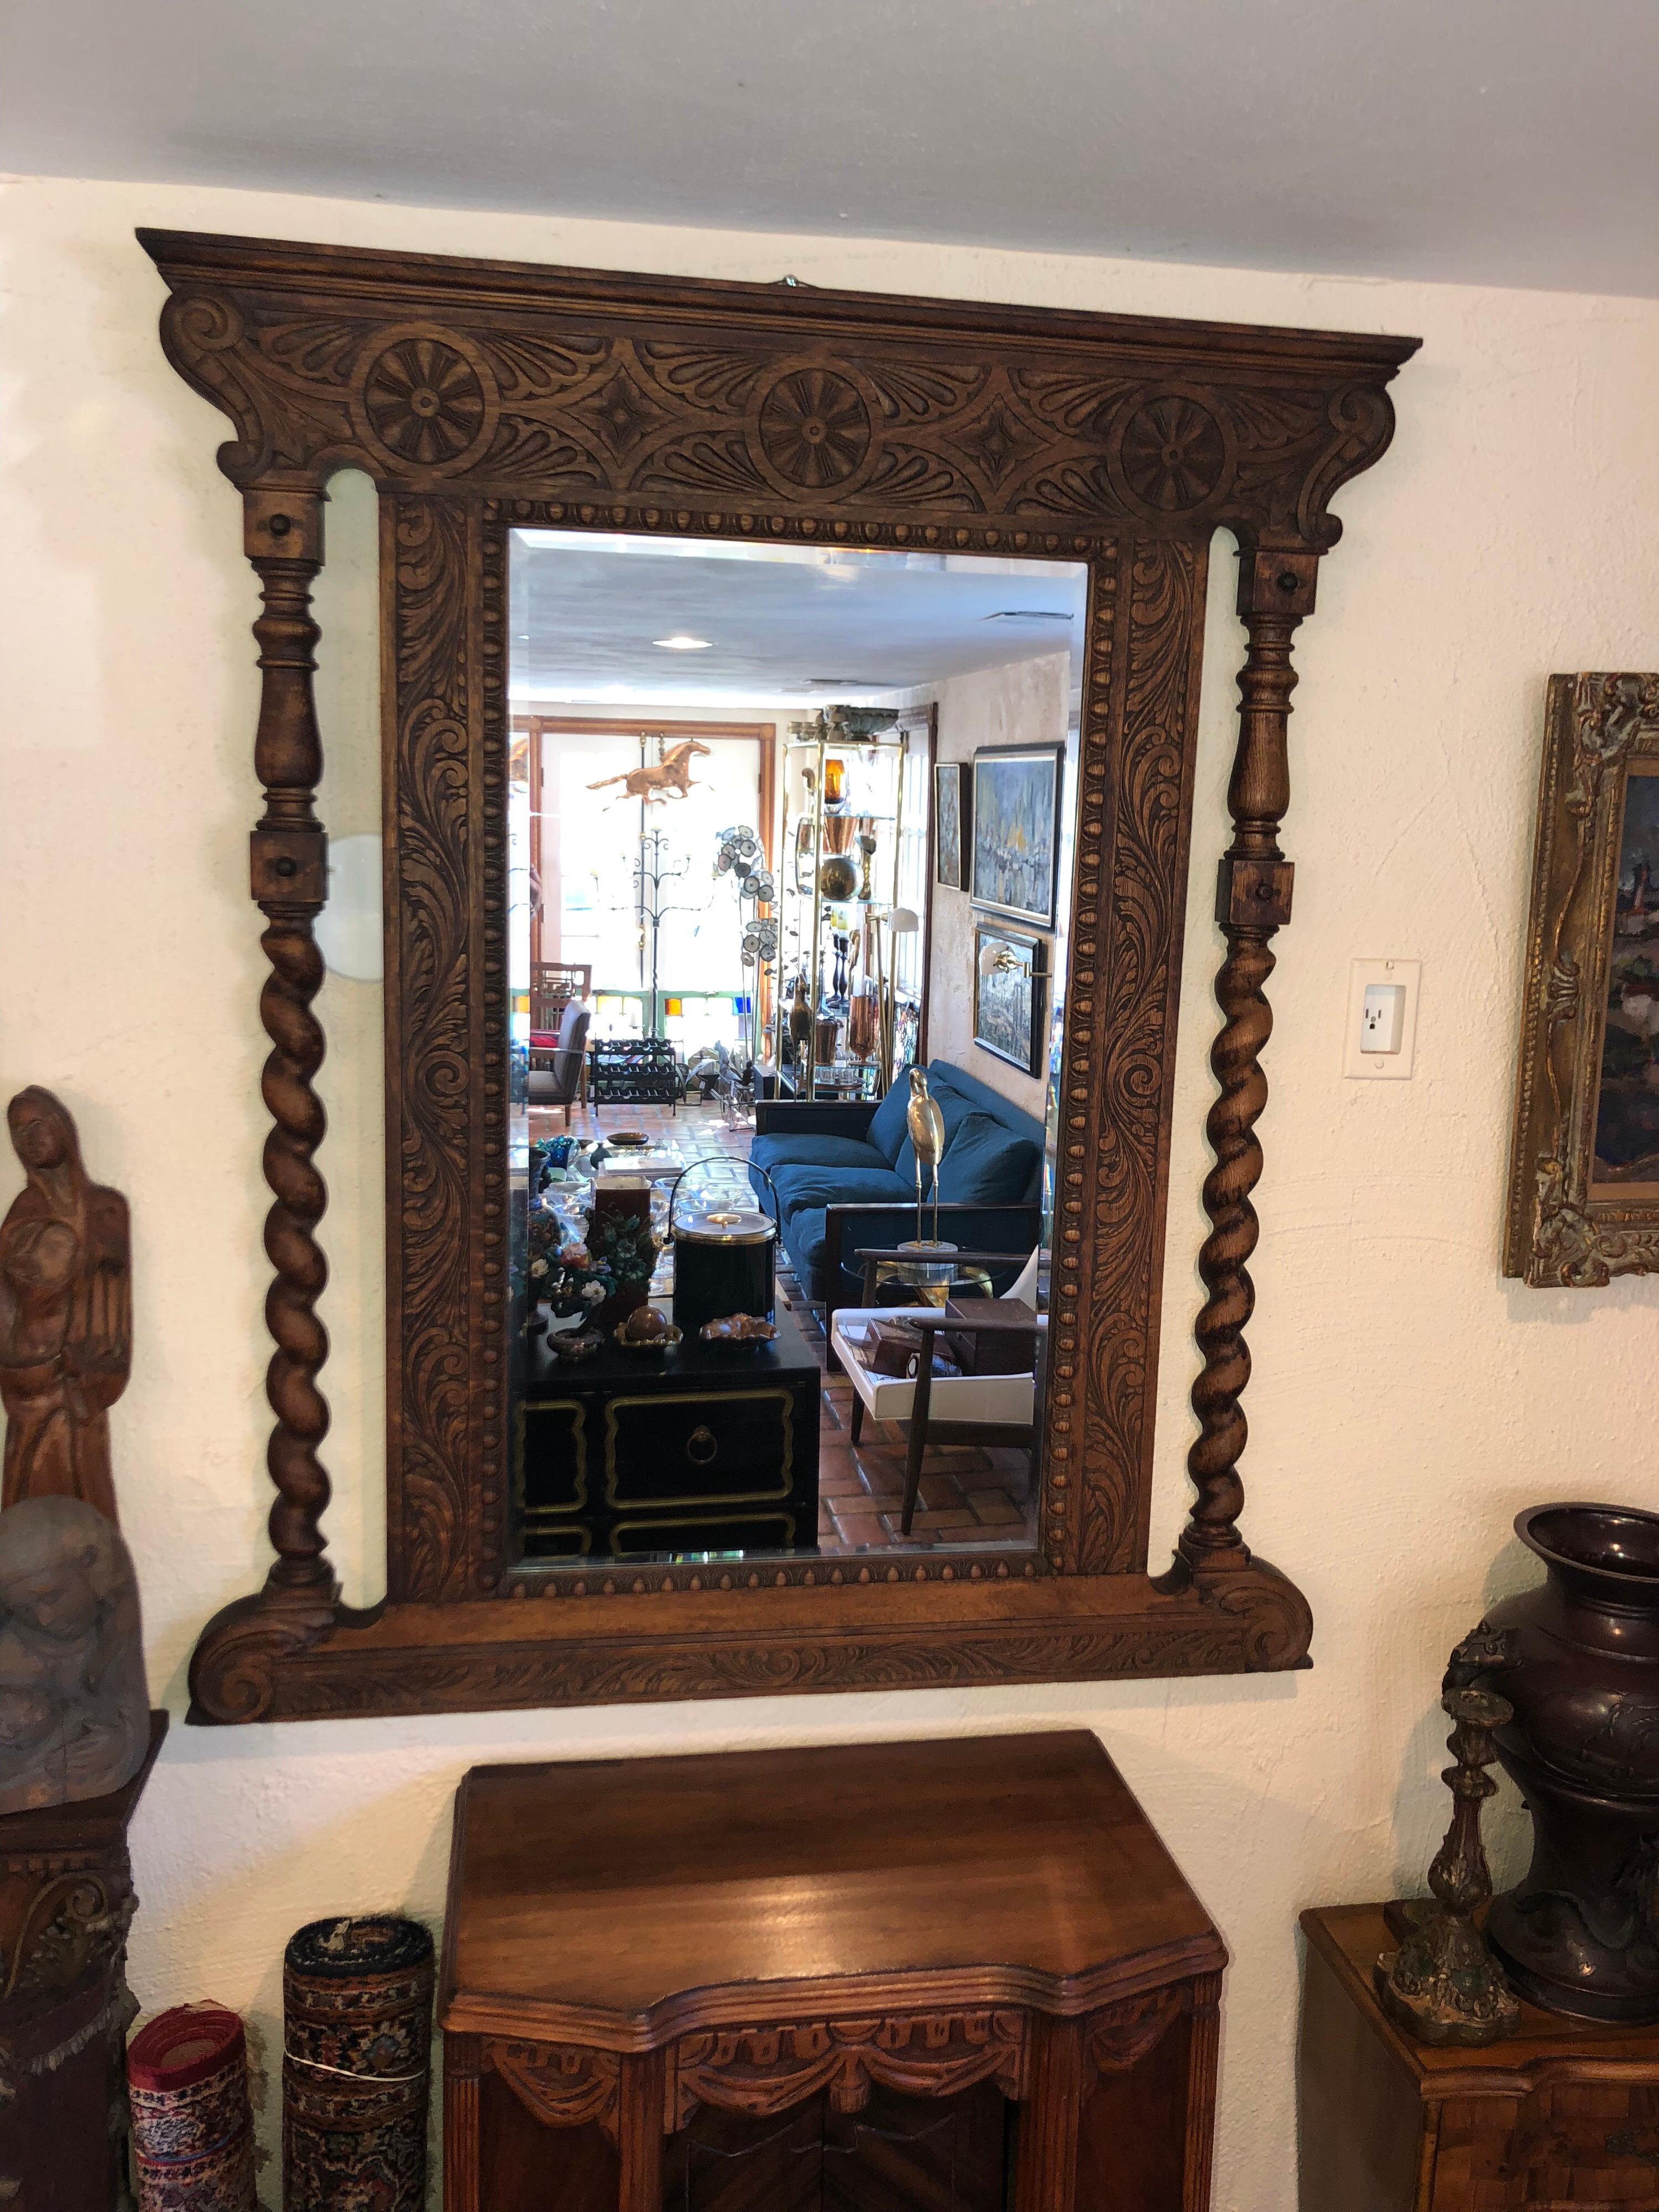 Carved Antique Oak Mirror with Barley twist sides. Intricate carving makes up this beautiful beveled mirror. Place in an entryway or above a dresser. Even use it in a bathroom above an antique vanity or above a narrow mantel.
Arts and crafts meets